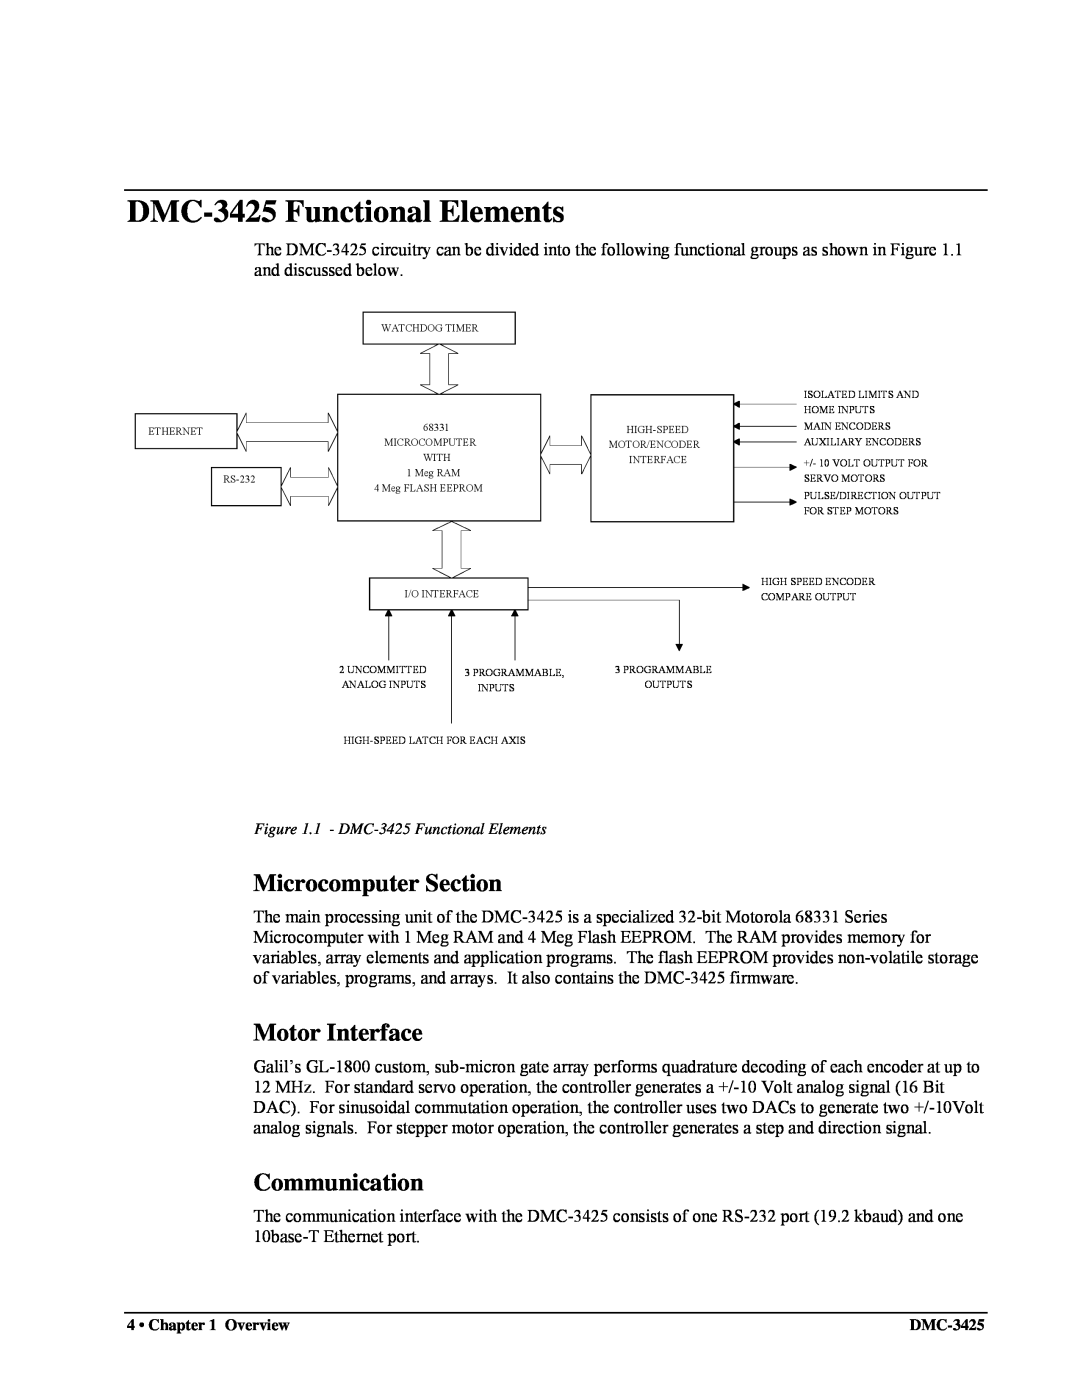 Galil user manual DMC-3425Functional Elements, Microcomputer Section, Motor Interface, Communication 